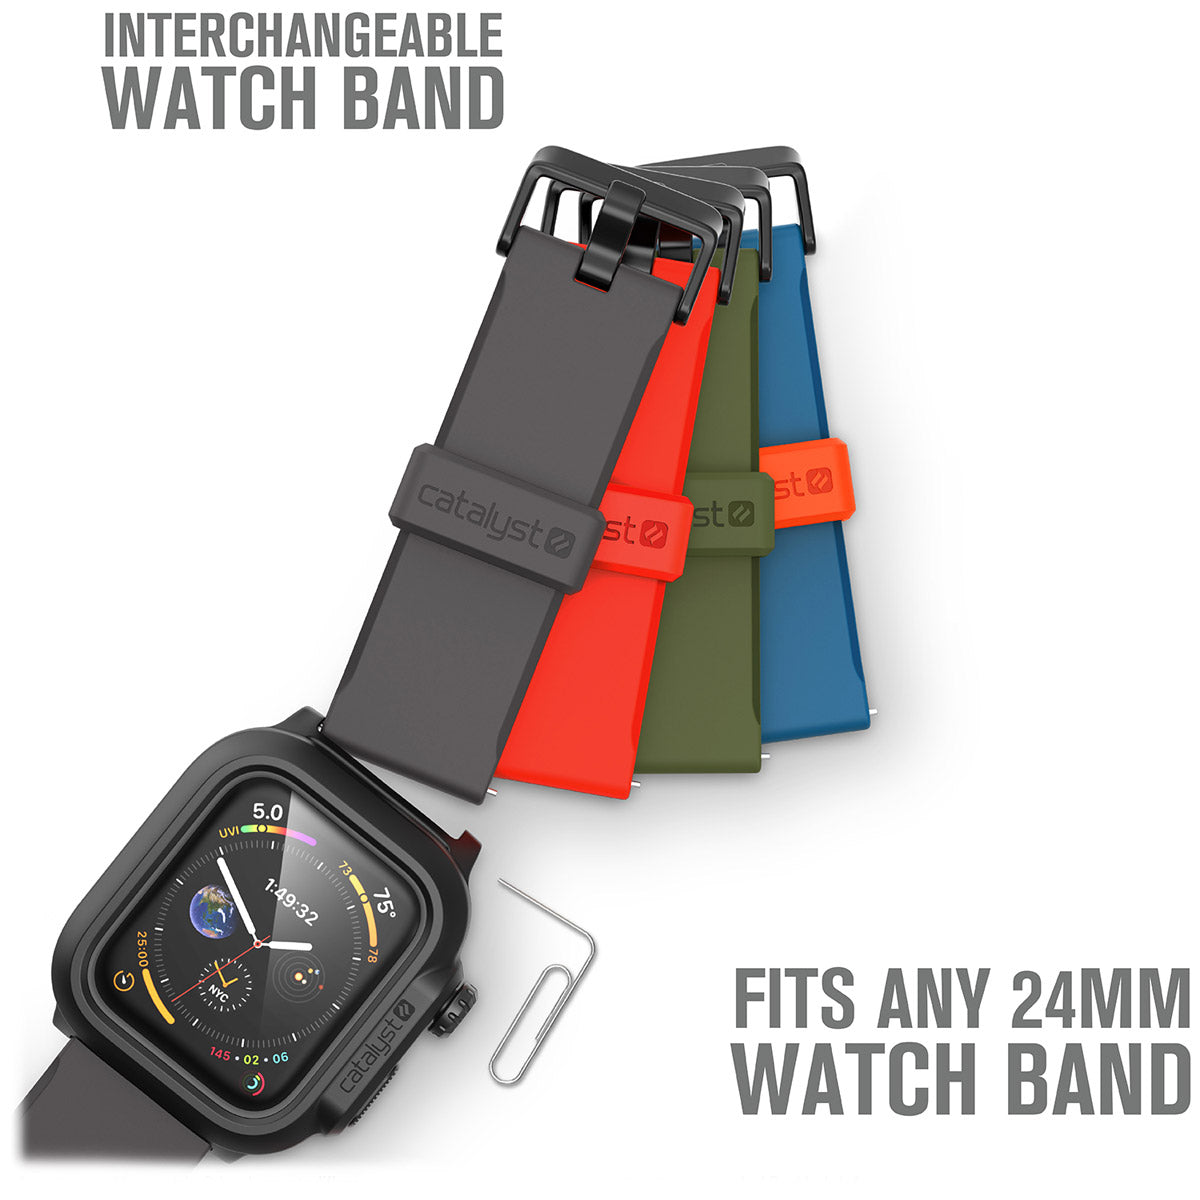 catalyst apple watch series 6 5 4 se gen 2 1 40mm 44mm waterproof case band showing the catalyst case paper clip gray red green blue bands text reads interchangeable watch band fits any 24mm watch band